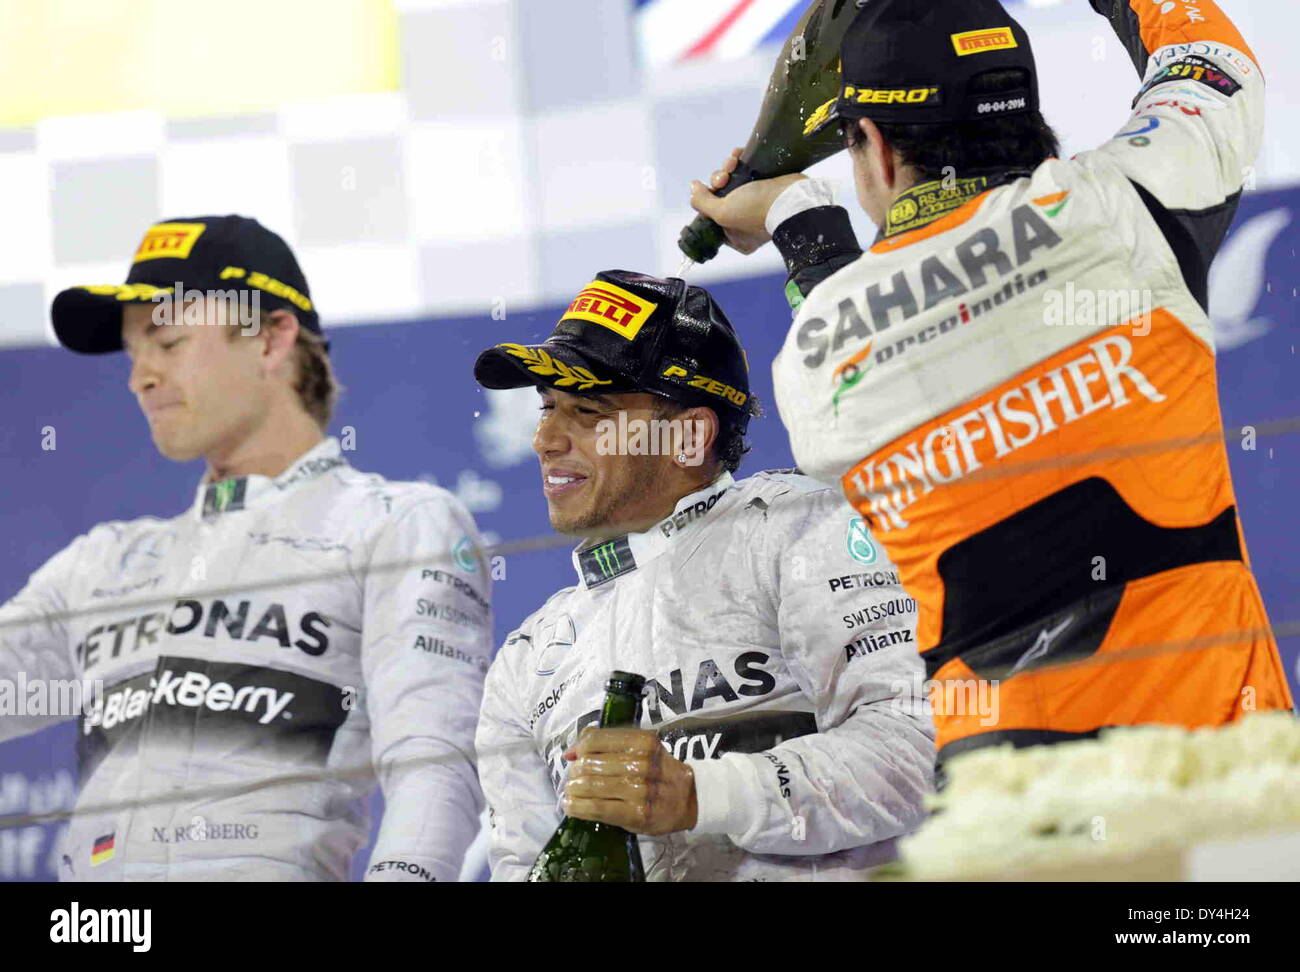 Manama, Bahrain. 06th Apr, 2014. Mercedes' Lewis Hamilton (C), Nico Rosberg (L) and Force India's Sergio Perez celebrate after the final of Formula 1 Bahrain Grand Prix in Manama, Bahrain, on April 6, 2014. Hamilton won the title with 1 hour 39 minutes and 42.743 seconds.  Credit:  Hasan Jamali/Xinhua/Alamy Live News Stock Photo